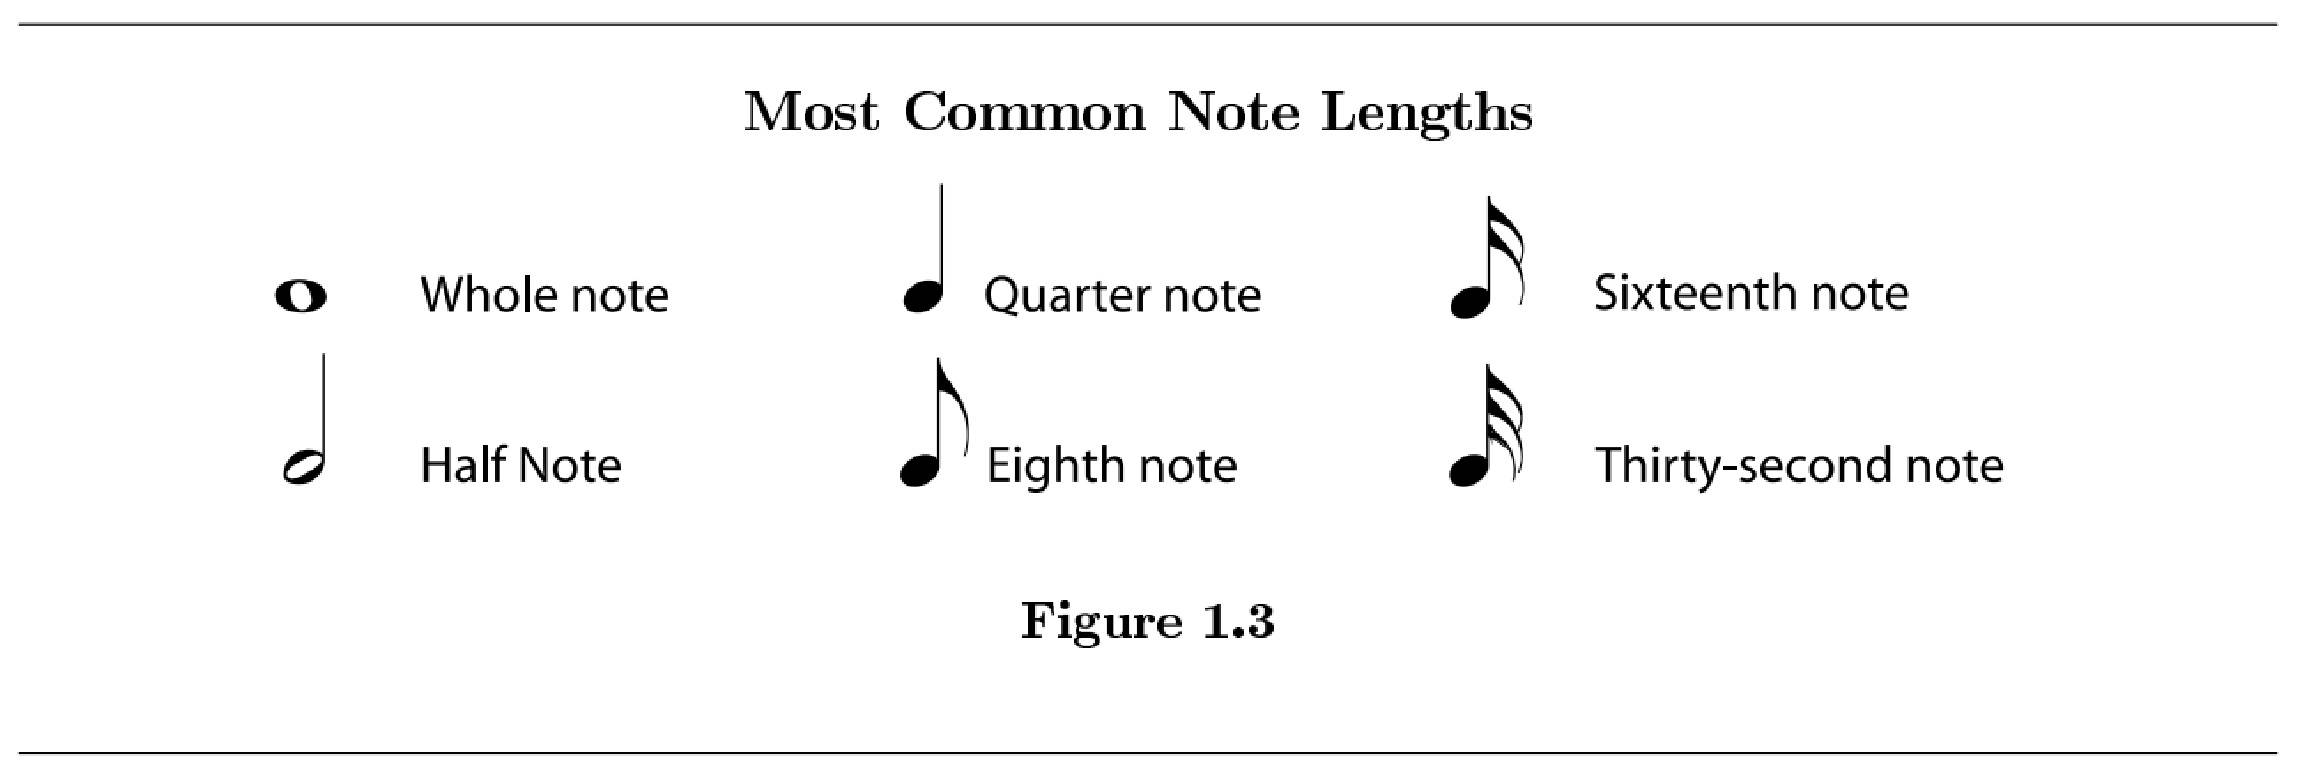 most common note lengths